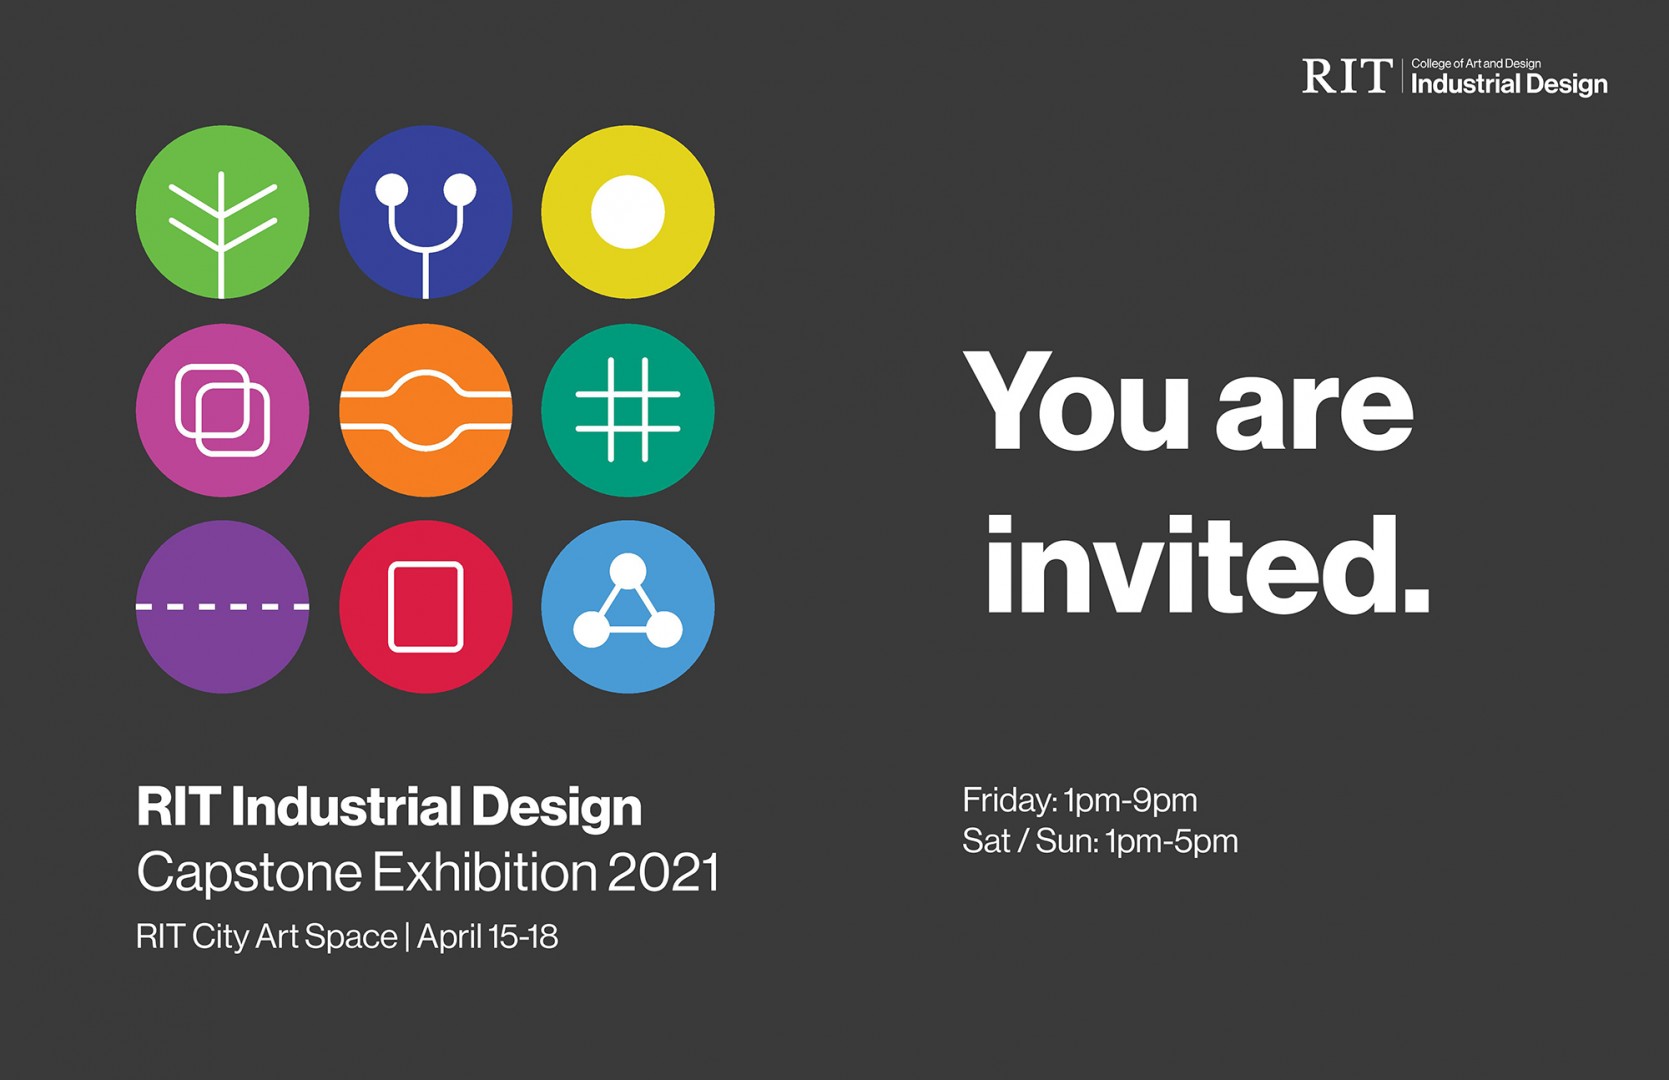 A graphic with text and icons promoting the Industrial Design capstone exhibition. 